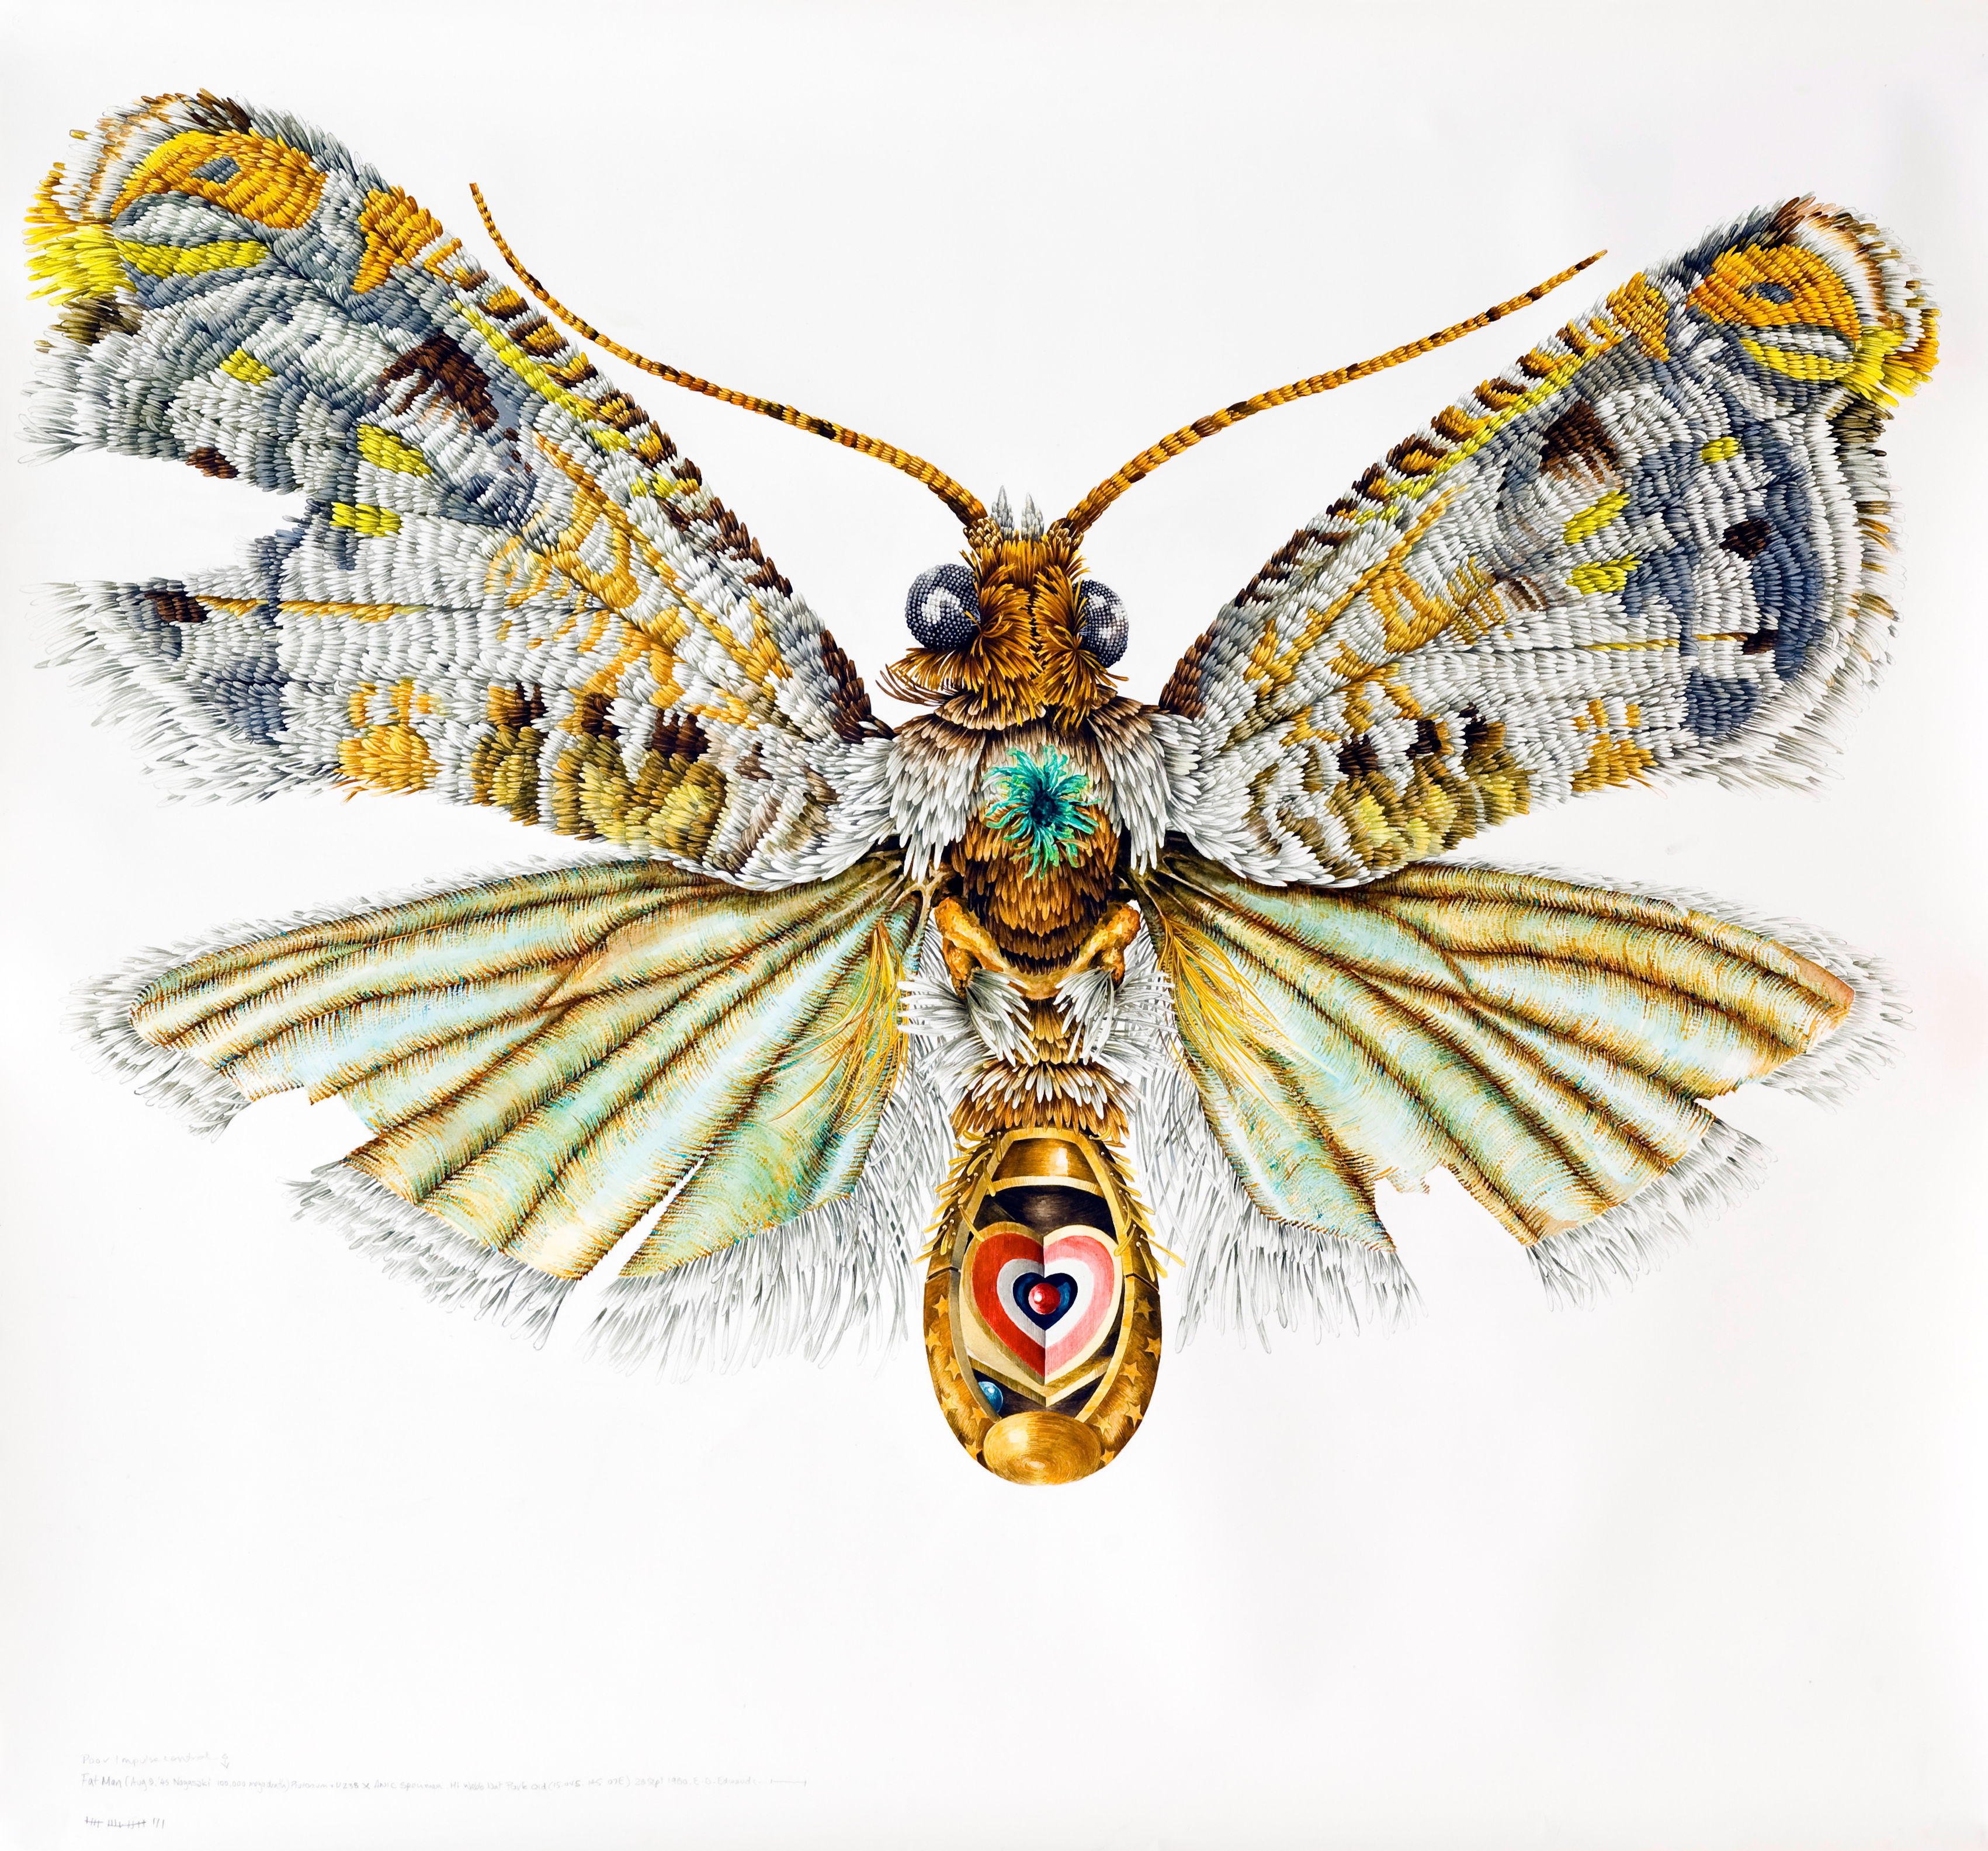 A highly detailed painting of a yellow-toned moth with open wings. The lower body of the moth has a heart on it.